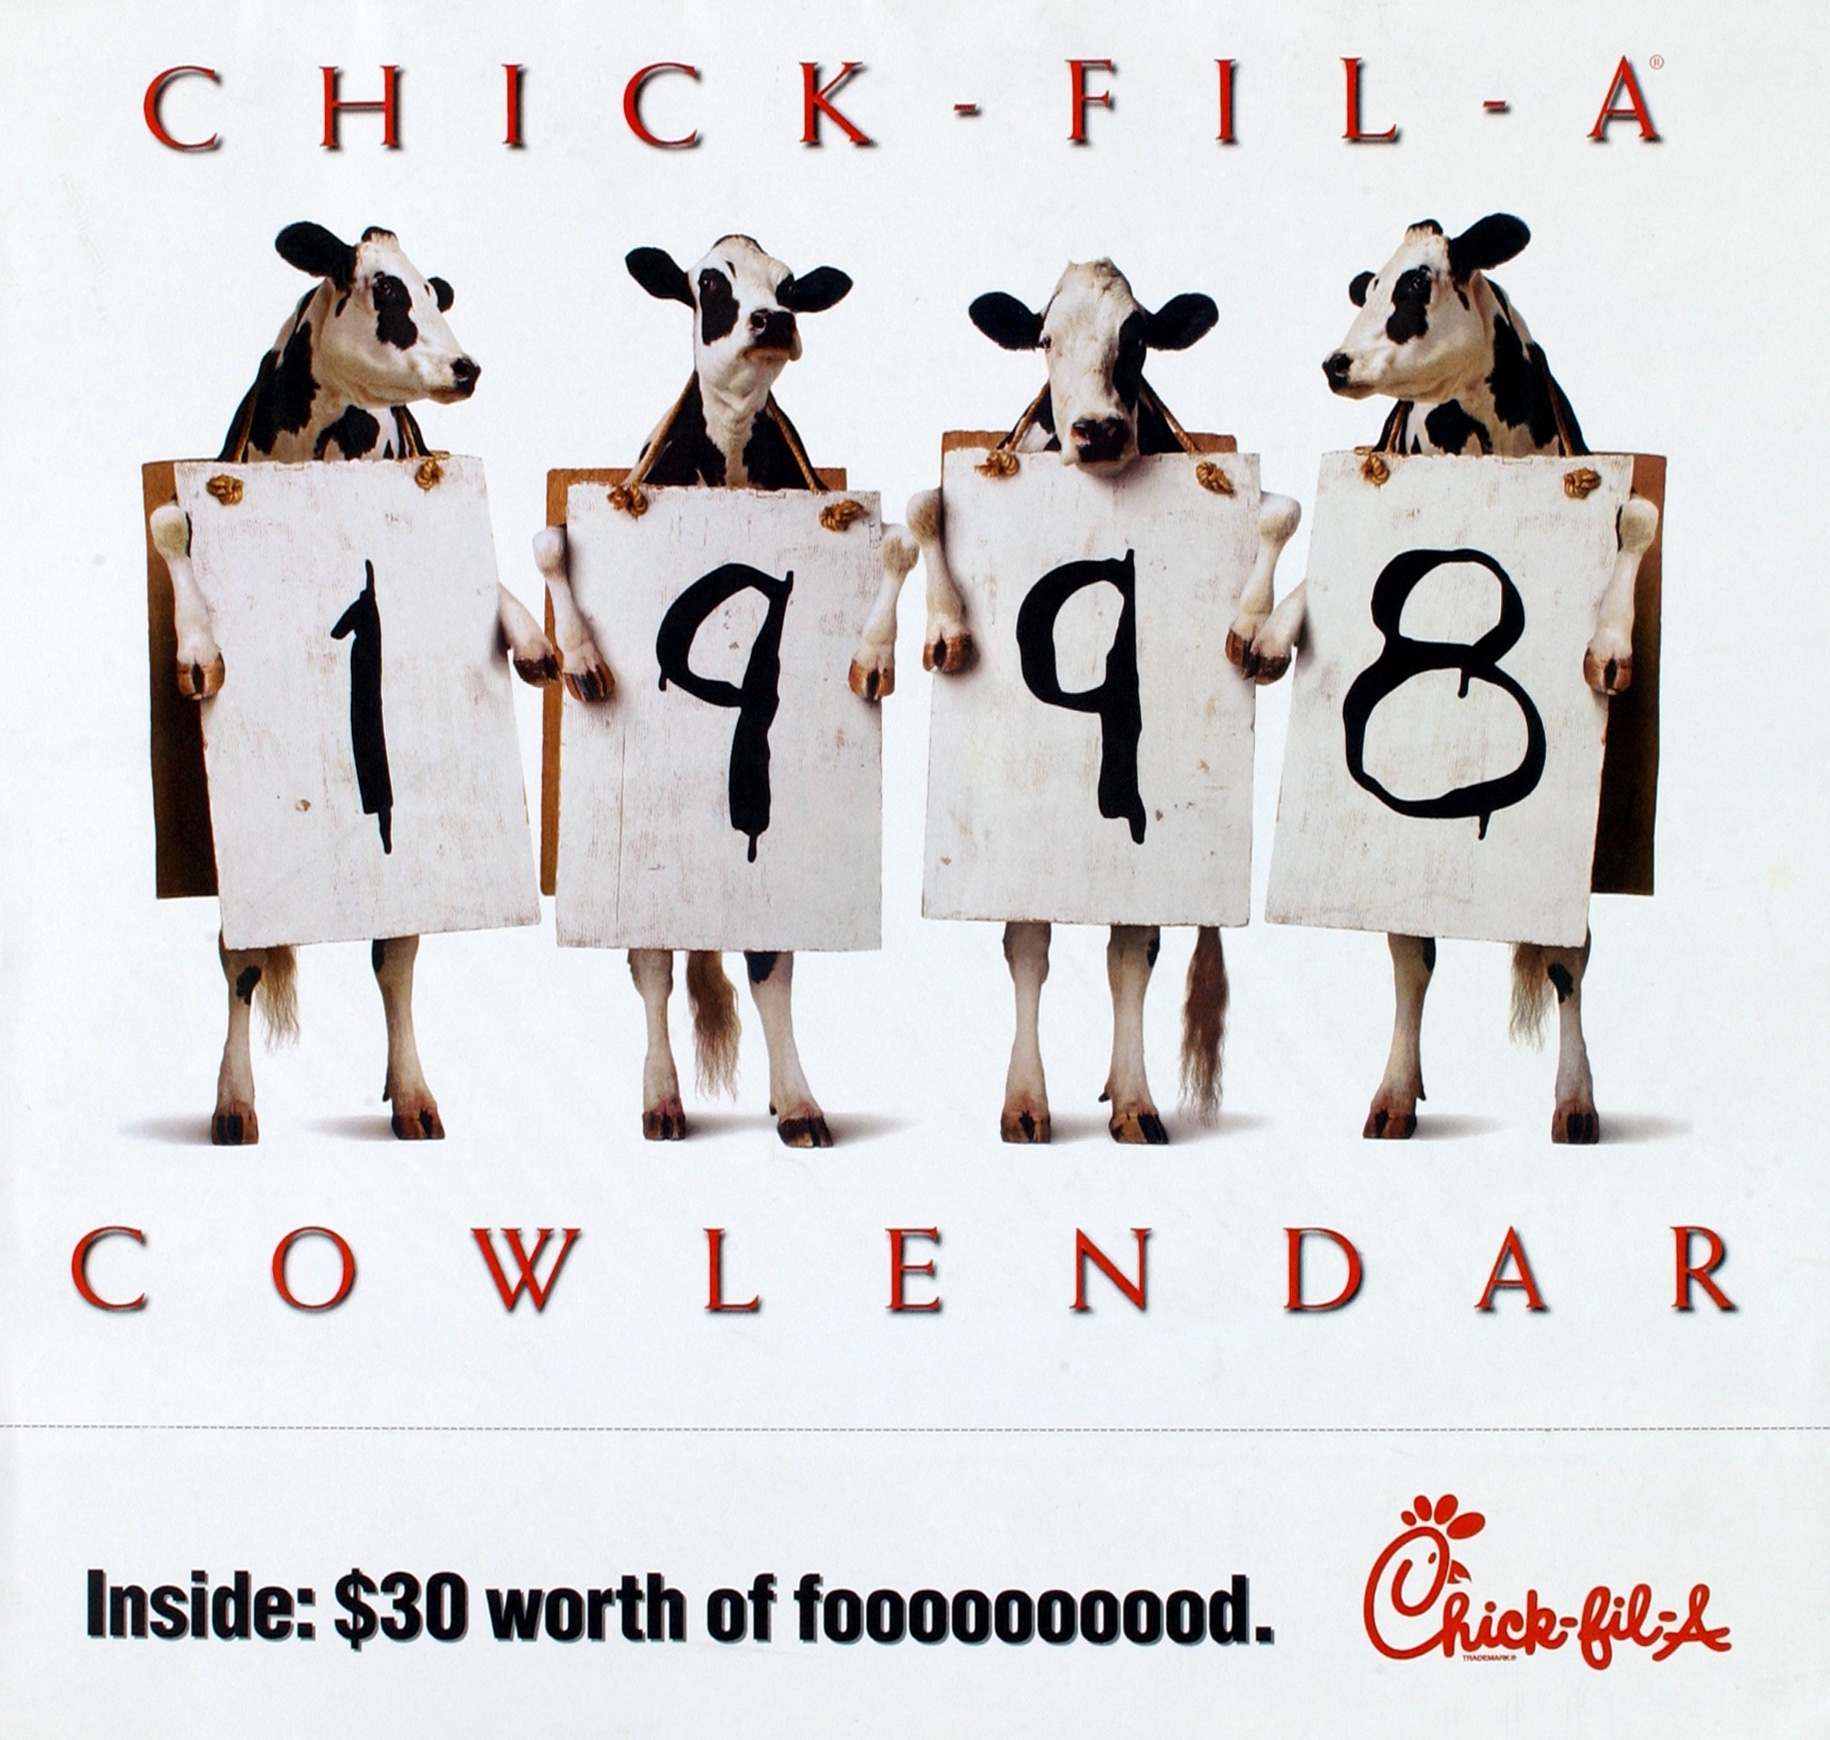 20Th Anniversary Of The Eat Mor Chikin Cow Campaign | Chick within Cow Calendar Chick Fil A